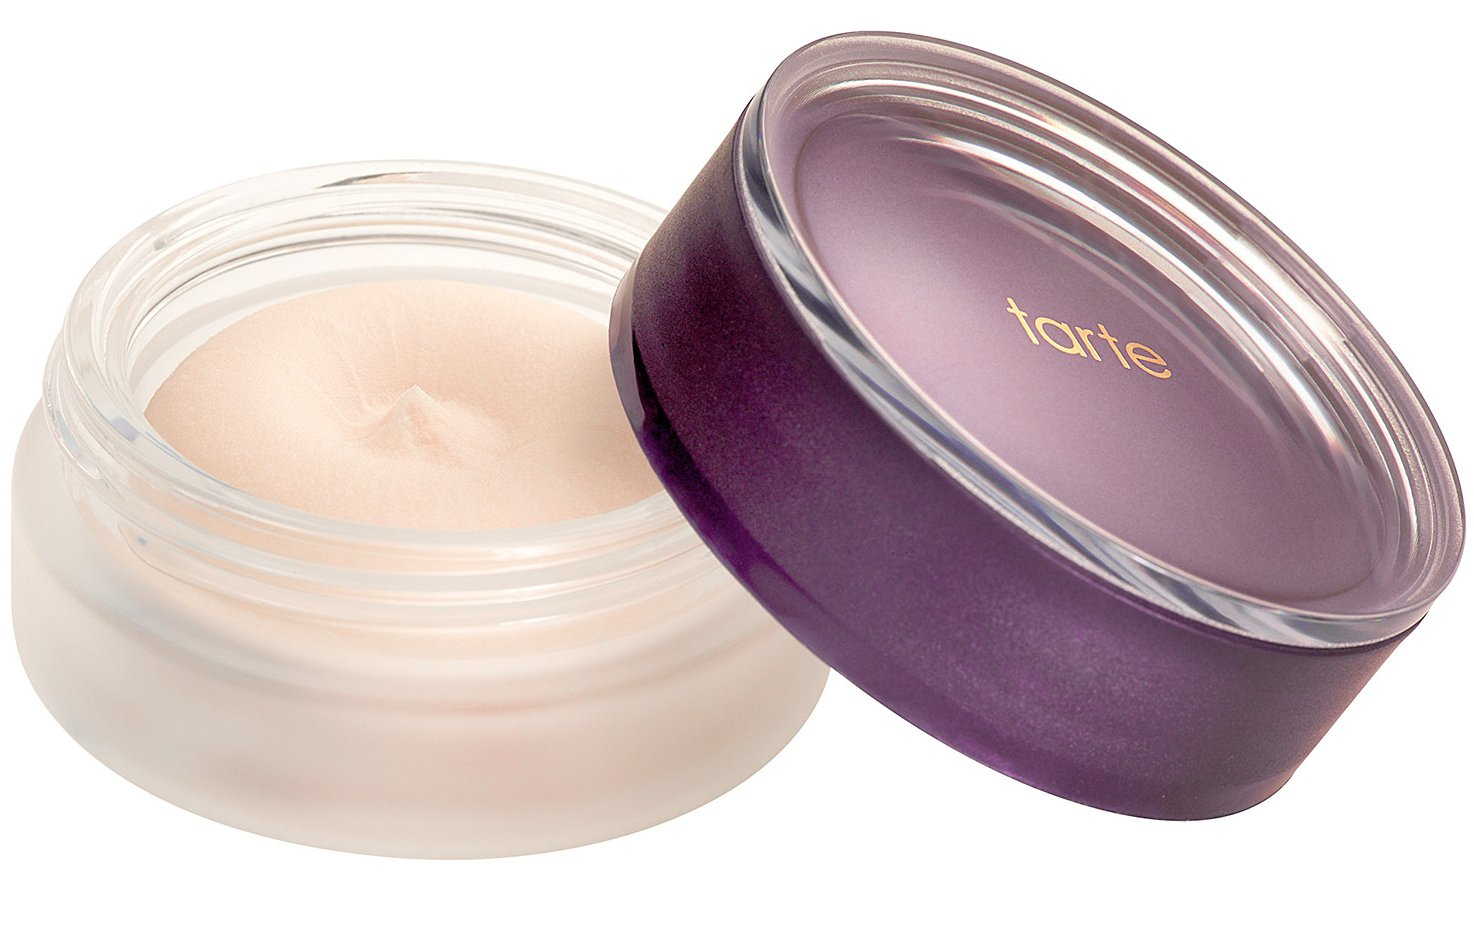 tarte timeless smoothing primer  fills, smoothes, and grips makeup for all-day wear. With one tiny dollop of product, you can expect the primer to double down on pores and texture, giving skin a focus so soft.